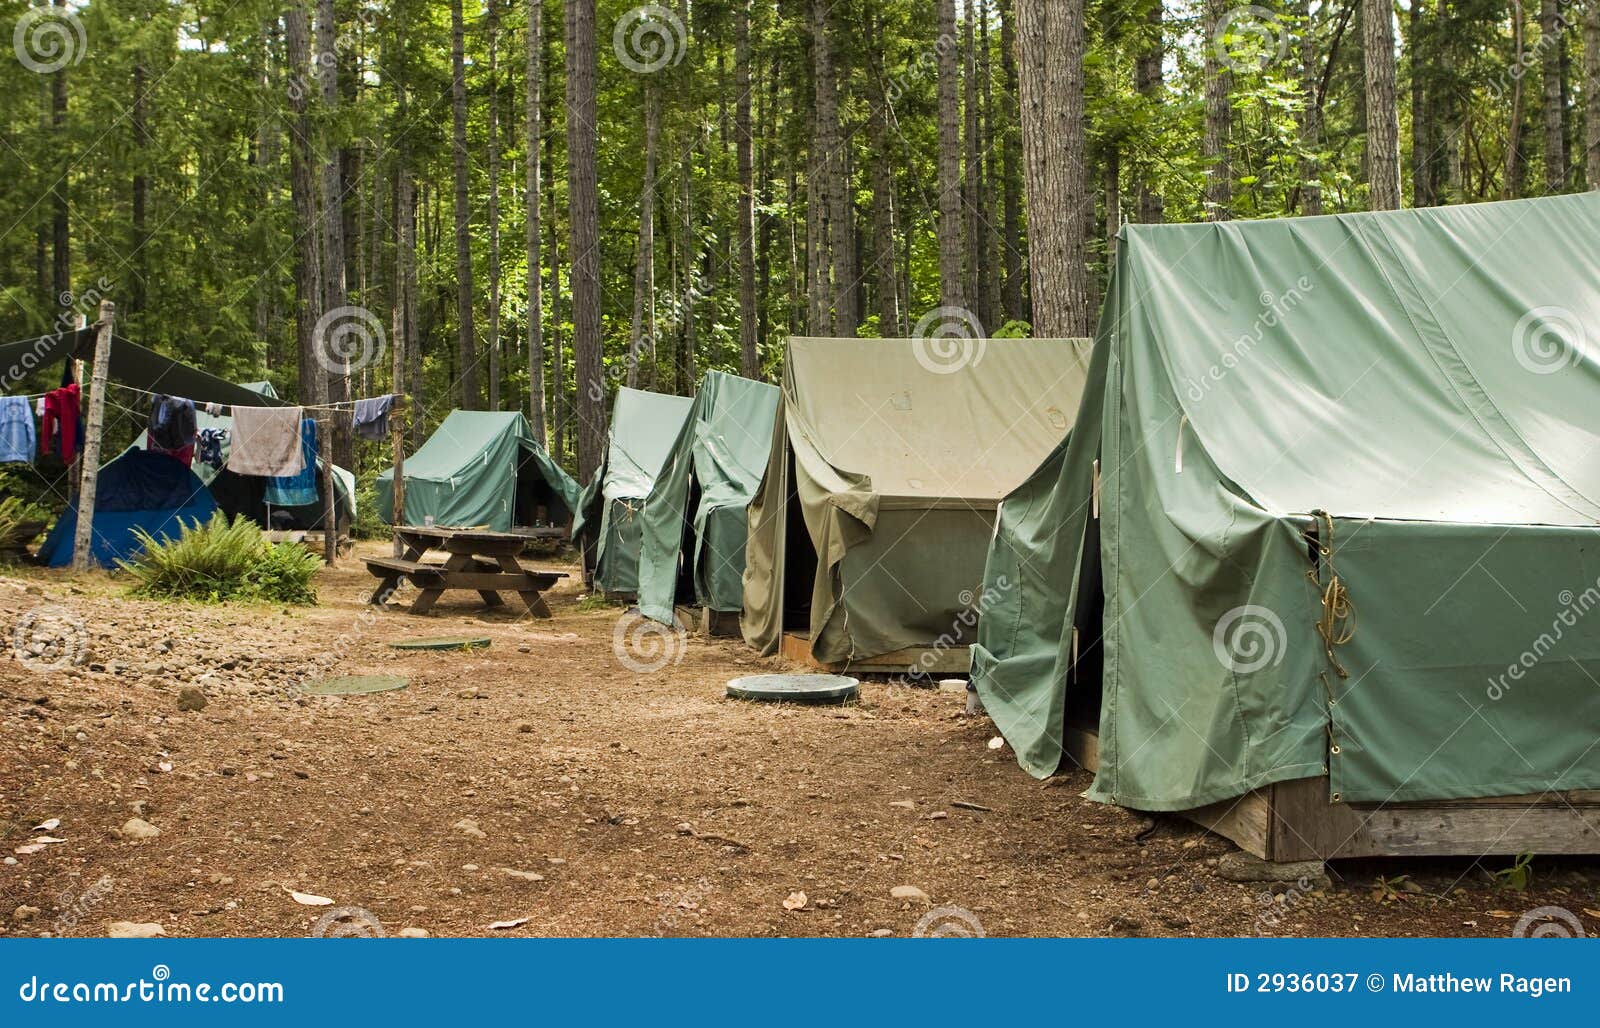 boy scout campground